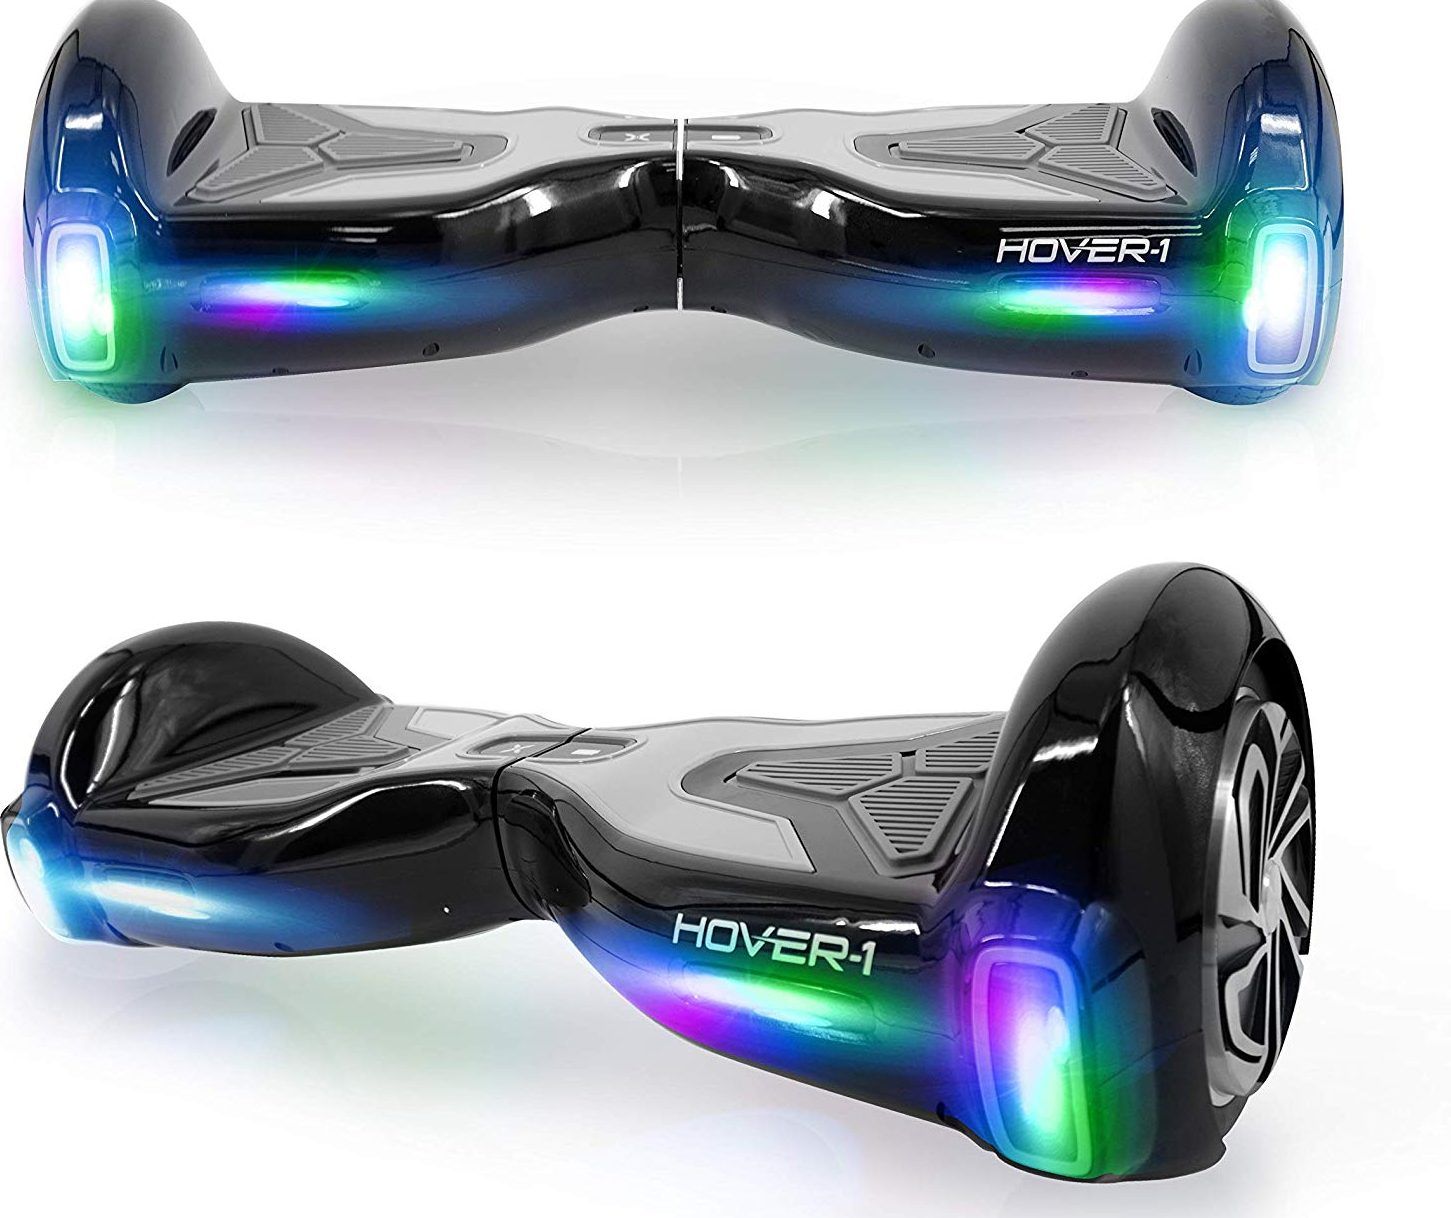 Hover2